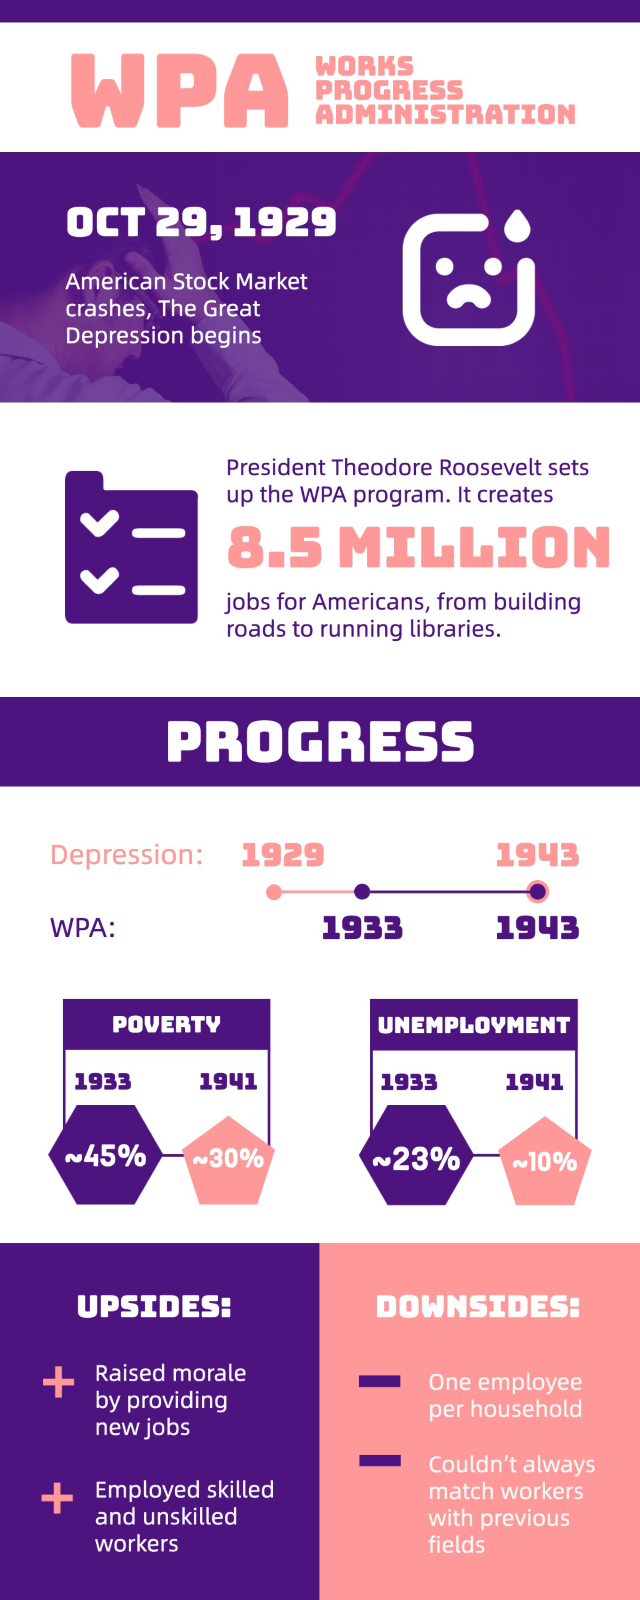 An infographic about Works Progress Administration with updates, key statistics, progress, upsides, and downsides